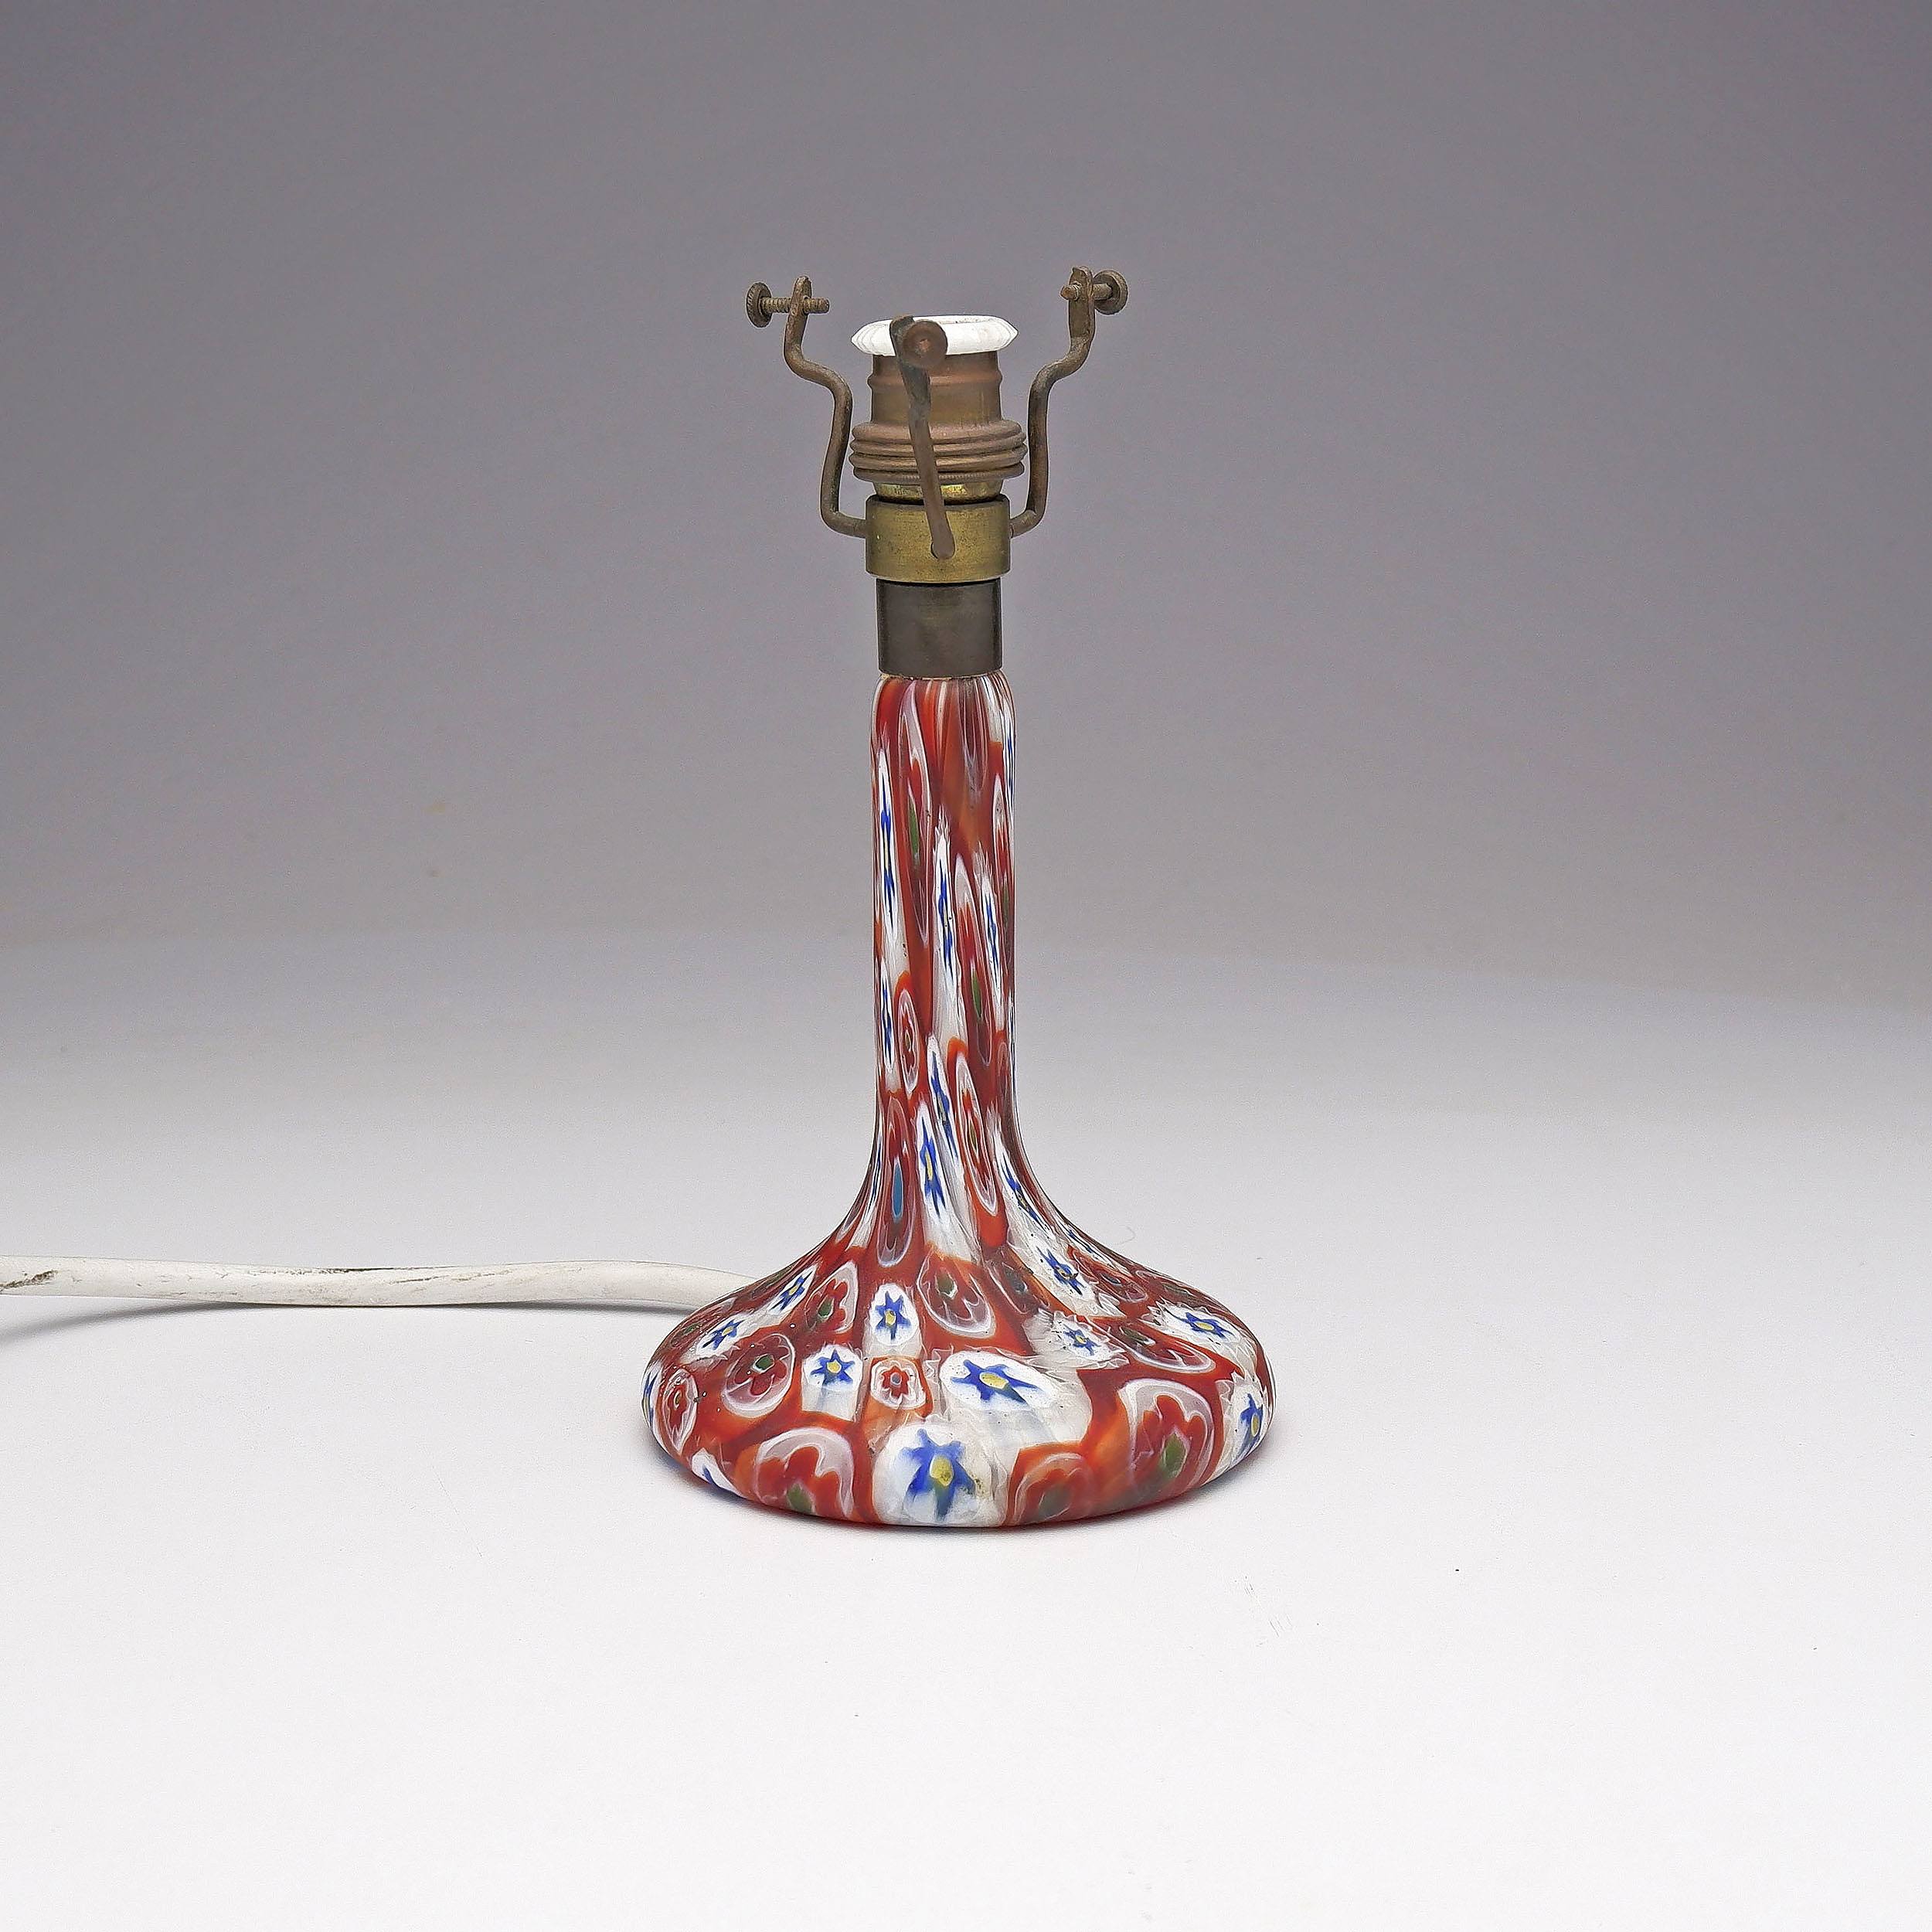 'Murano Fratelli Toso Lamp Base with Millefiori Canes, Early to Mid 20th Century'